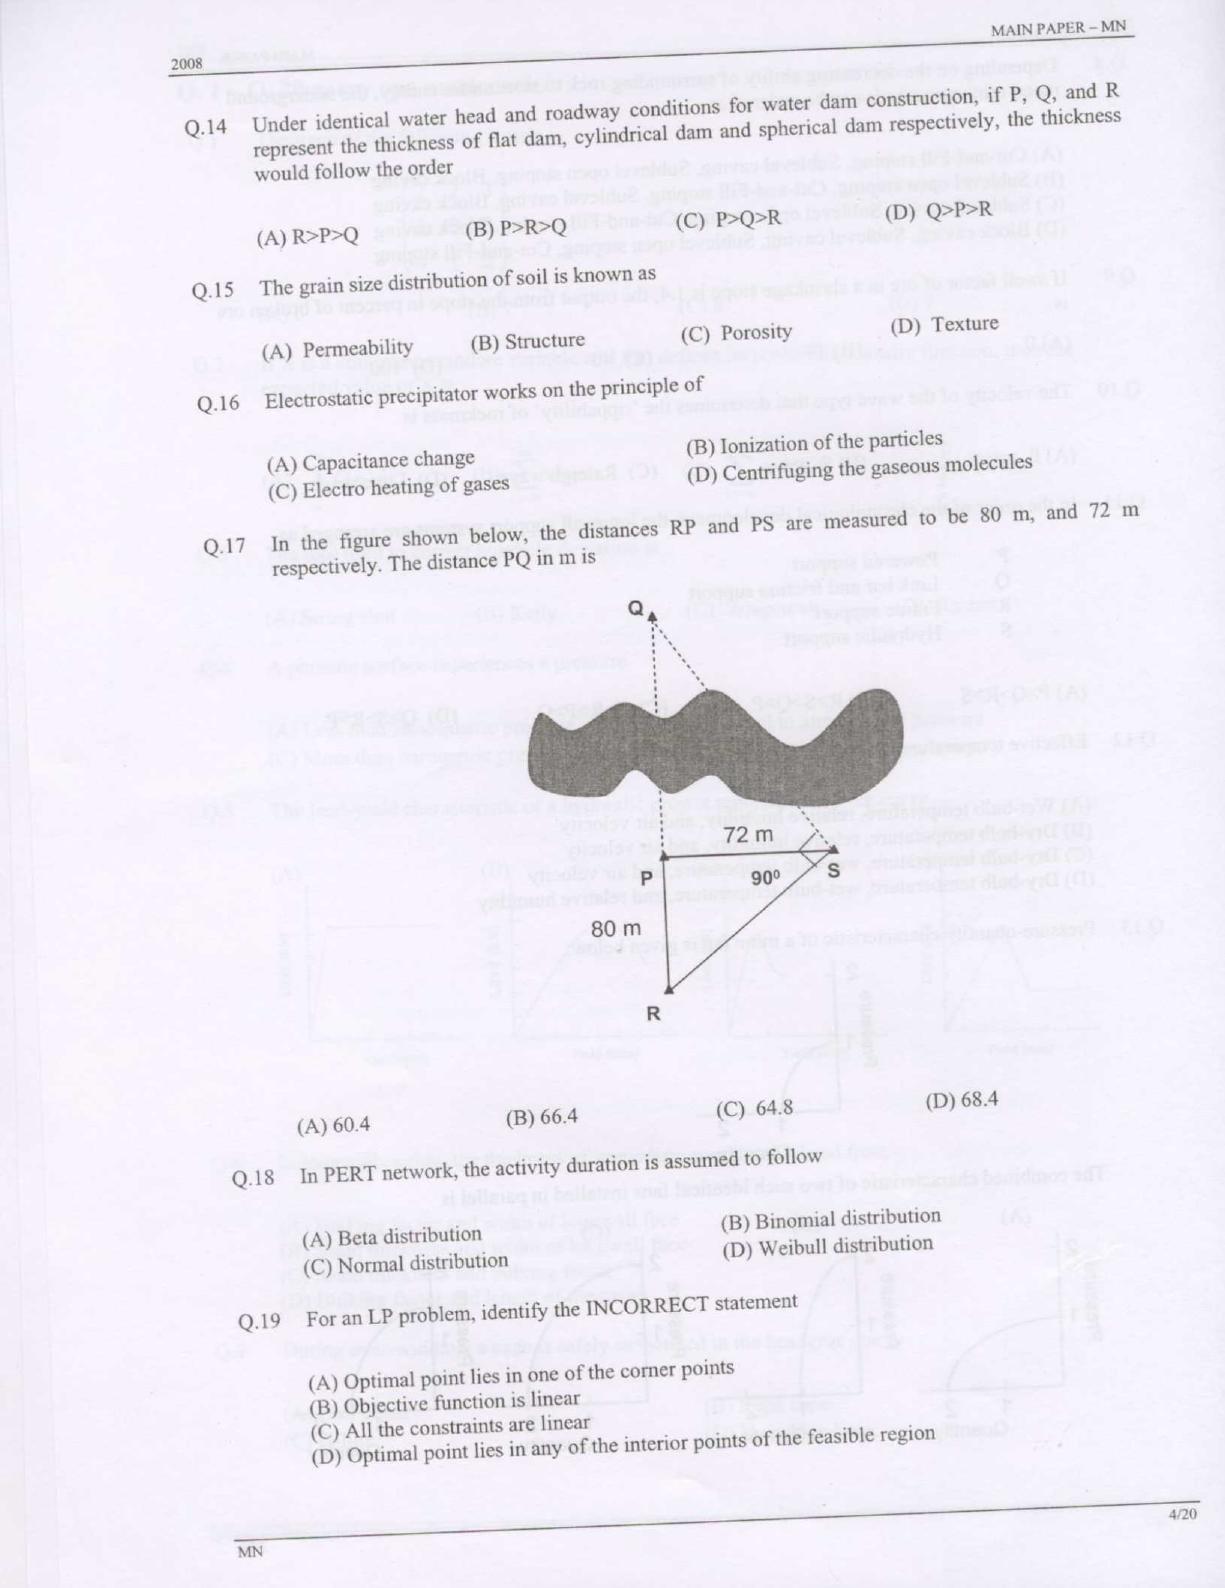 GATE 2008 Mining Engineering (MN) Question Paper with Answer Key - Page 4